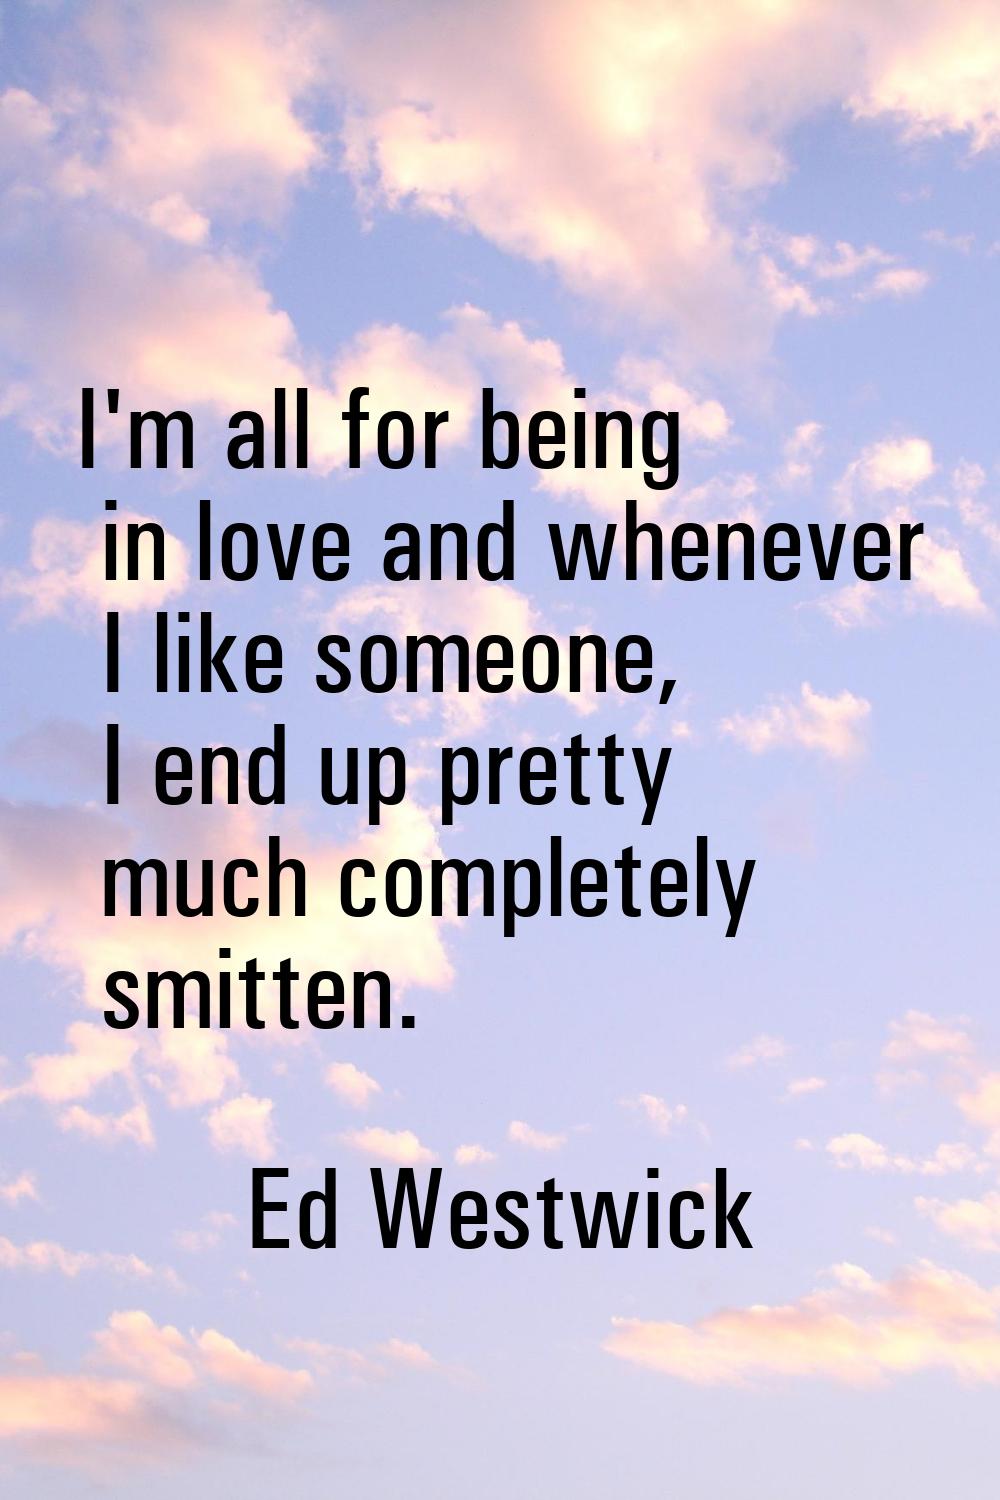 I'm all for being in love and whenever I like someone, I end up pretty much completely smitten.